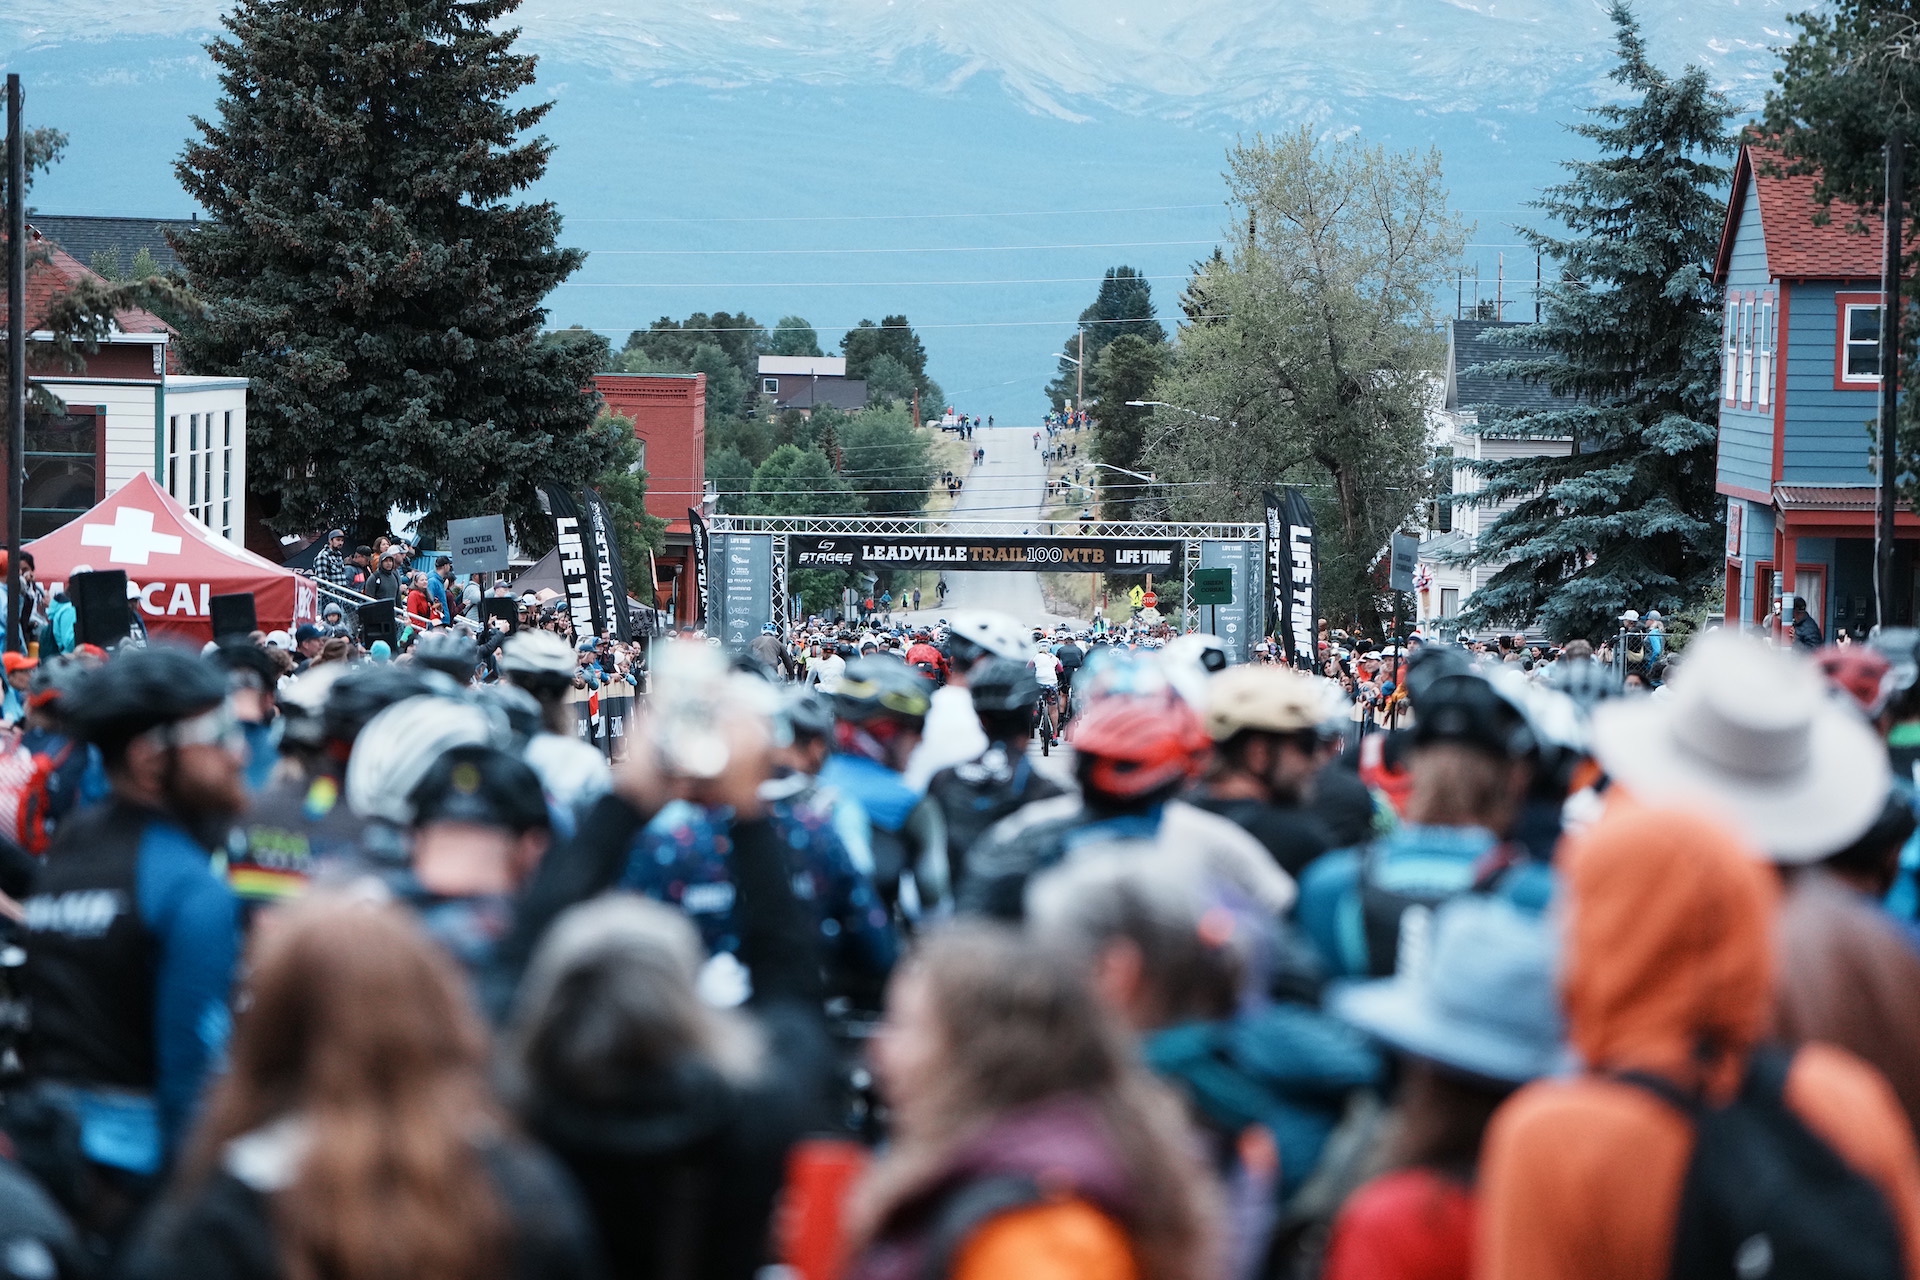 A view of the start of the Leadville Trail 100 mountain bike race, from a rider's perspective. The view looks down the street out of Leadville toward towering mountains in the background. In the foreground, a sea of riders is slightly out of focus as they await their start.